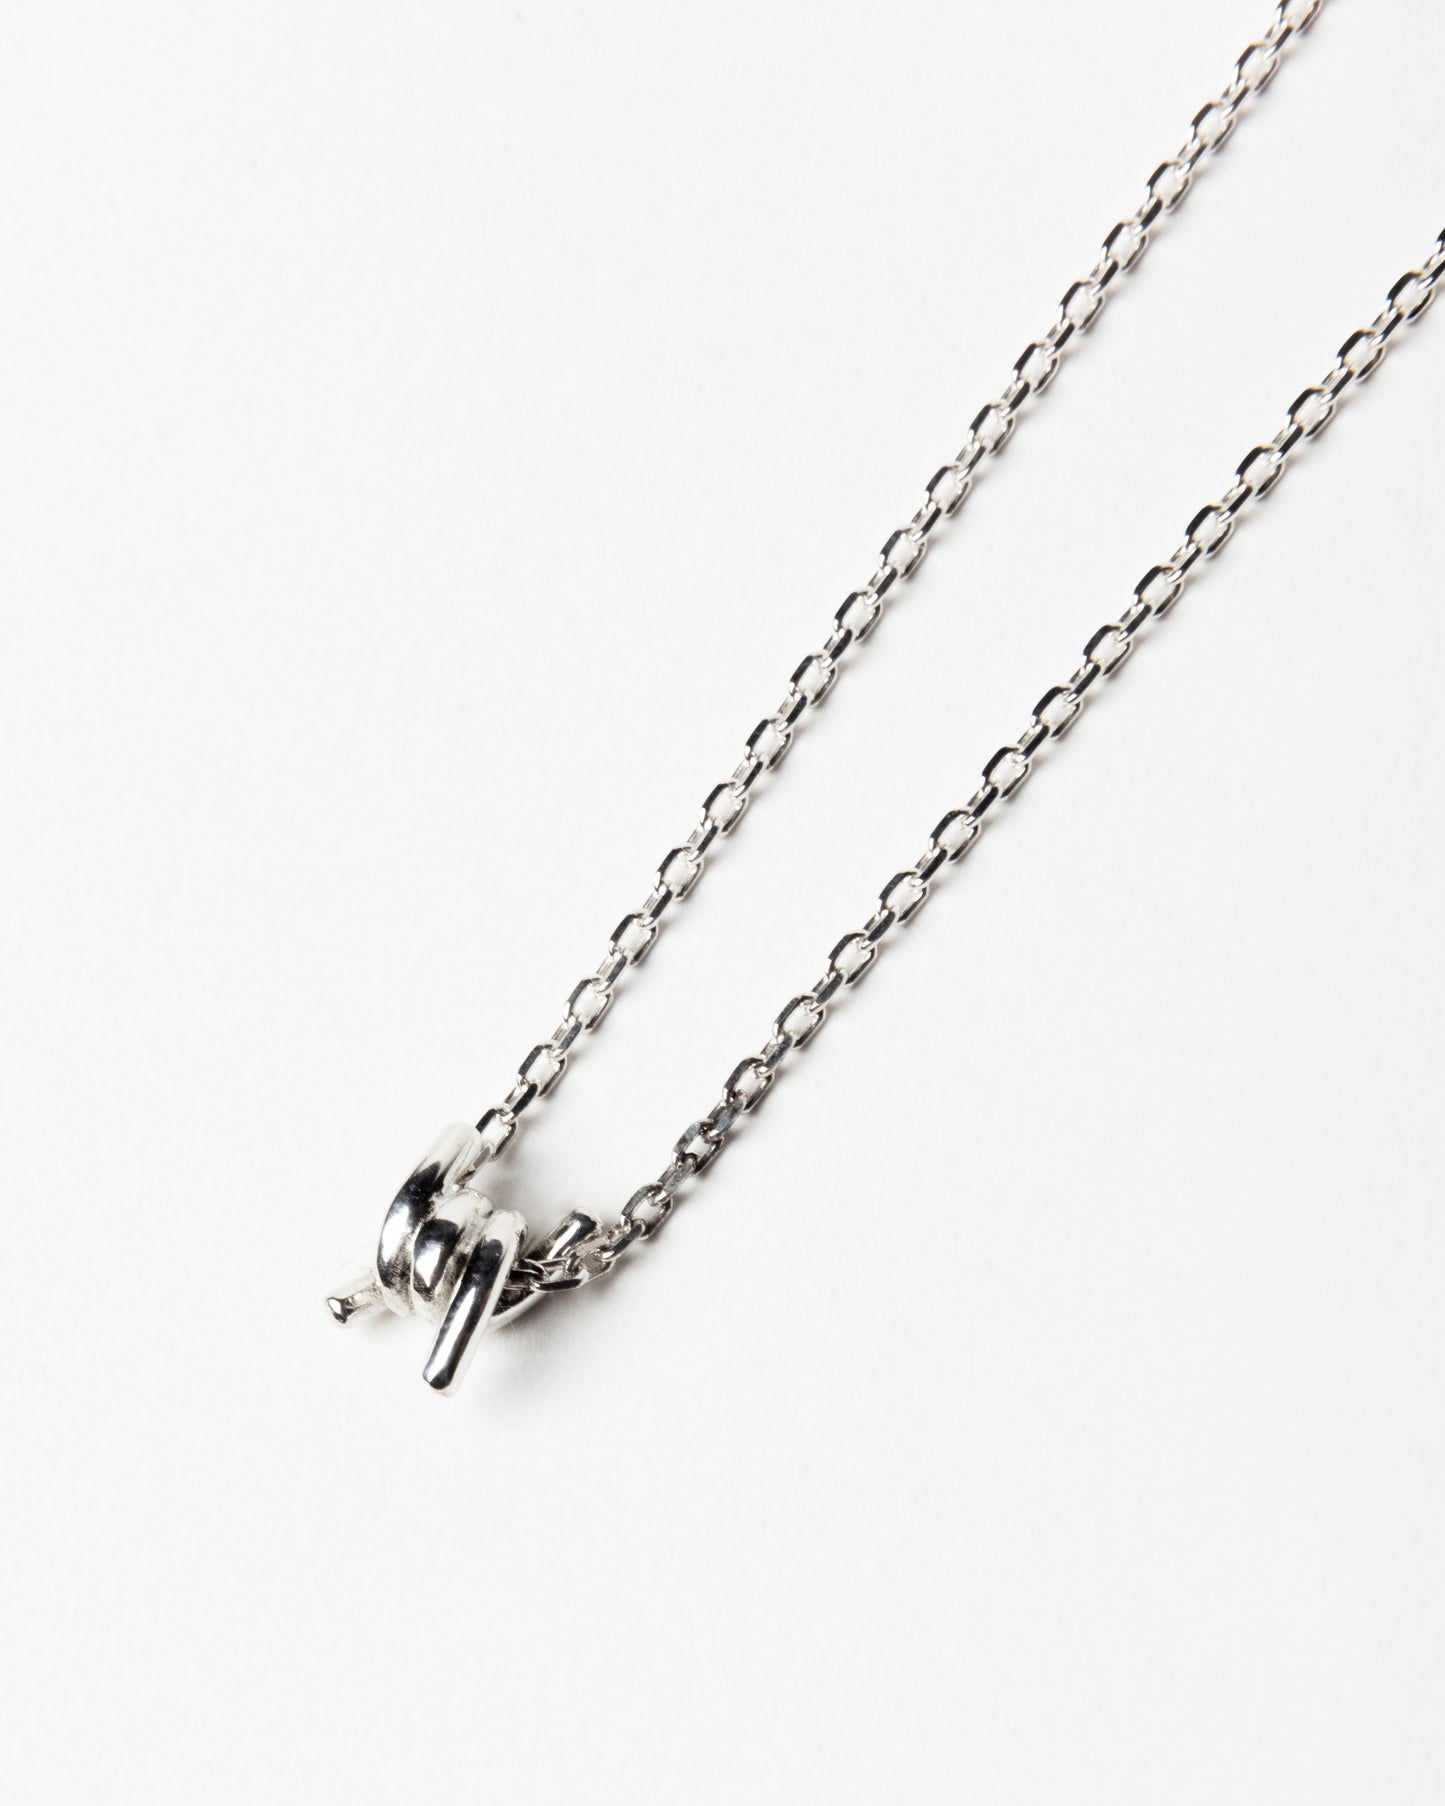 Barbed Wire Necklace